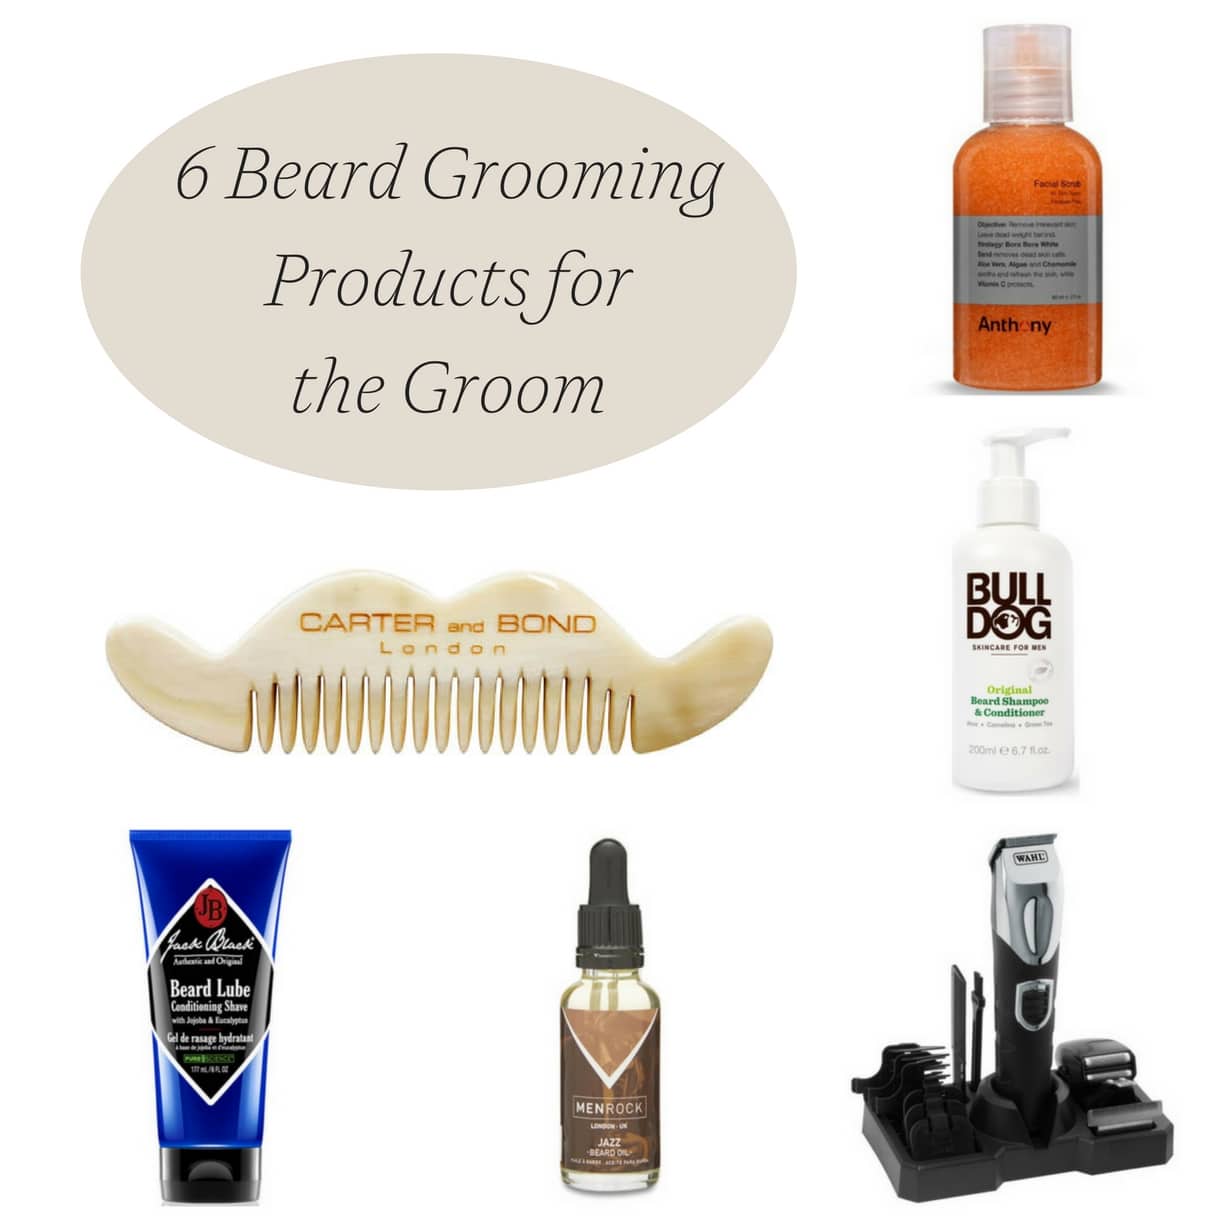 6 Beard Grooming Products for the Groom as seen on Hill City Bride Virginia Wedding Blog - oil, comb, shampoo, conditioner, scrub